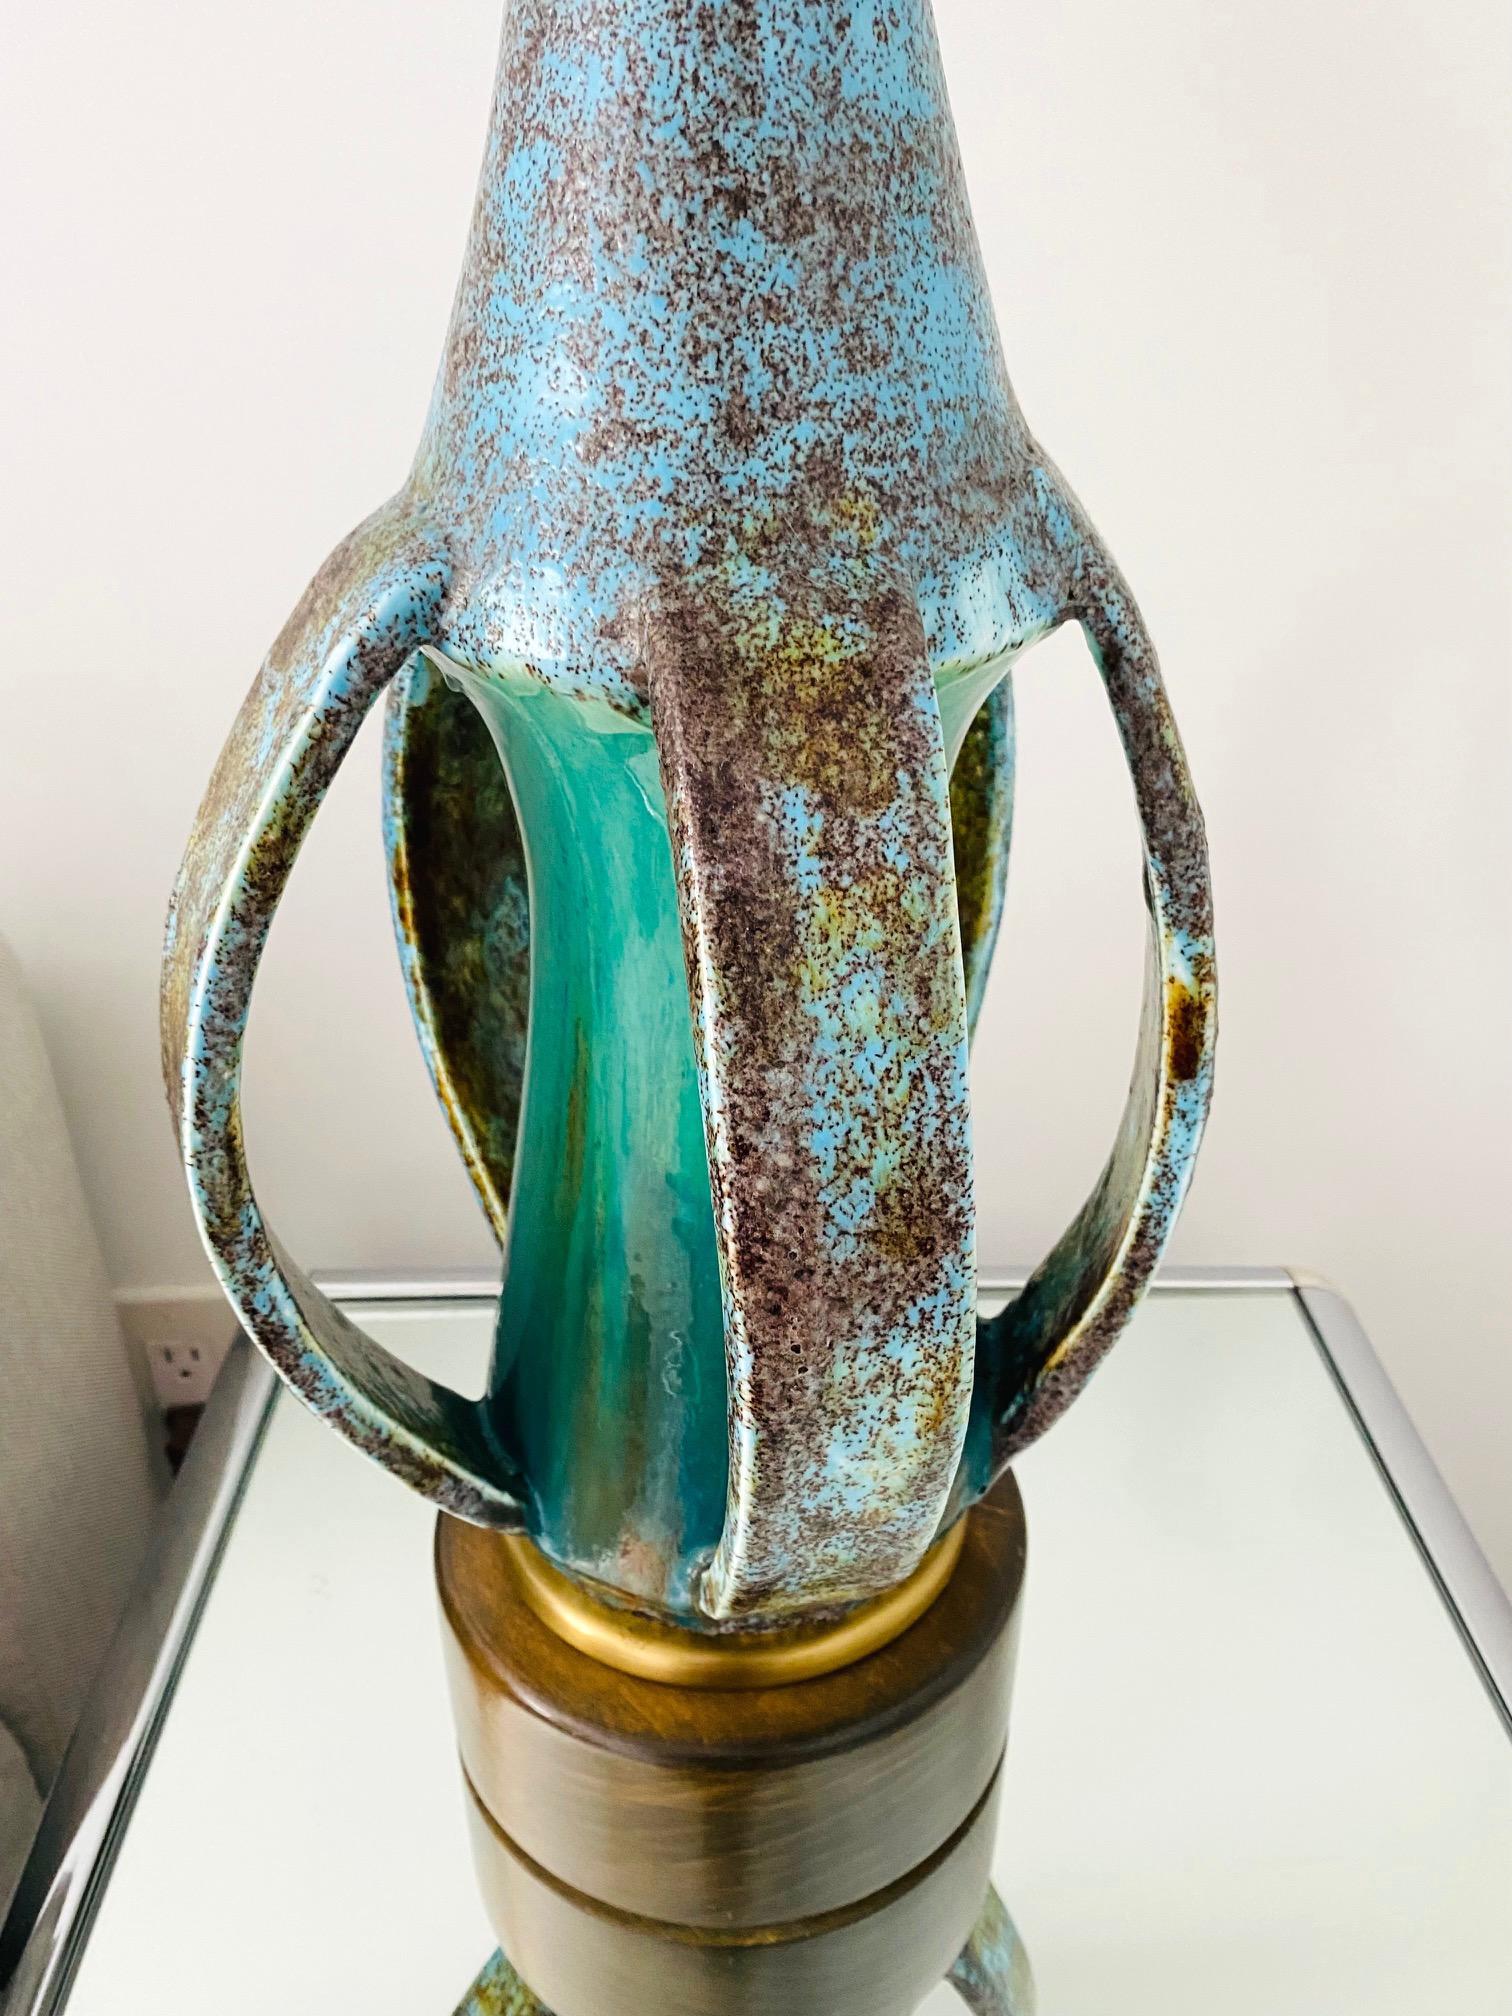 Mid-Century Modern Sculptural Pottery Lamp in Turquoise & Blue, Denmark C. 1960s For Sale 1